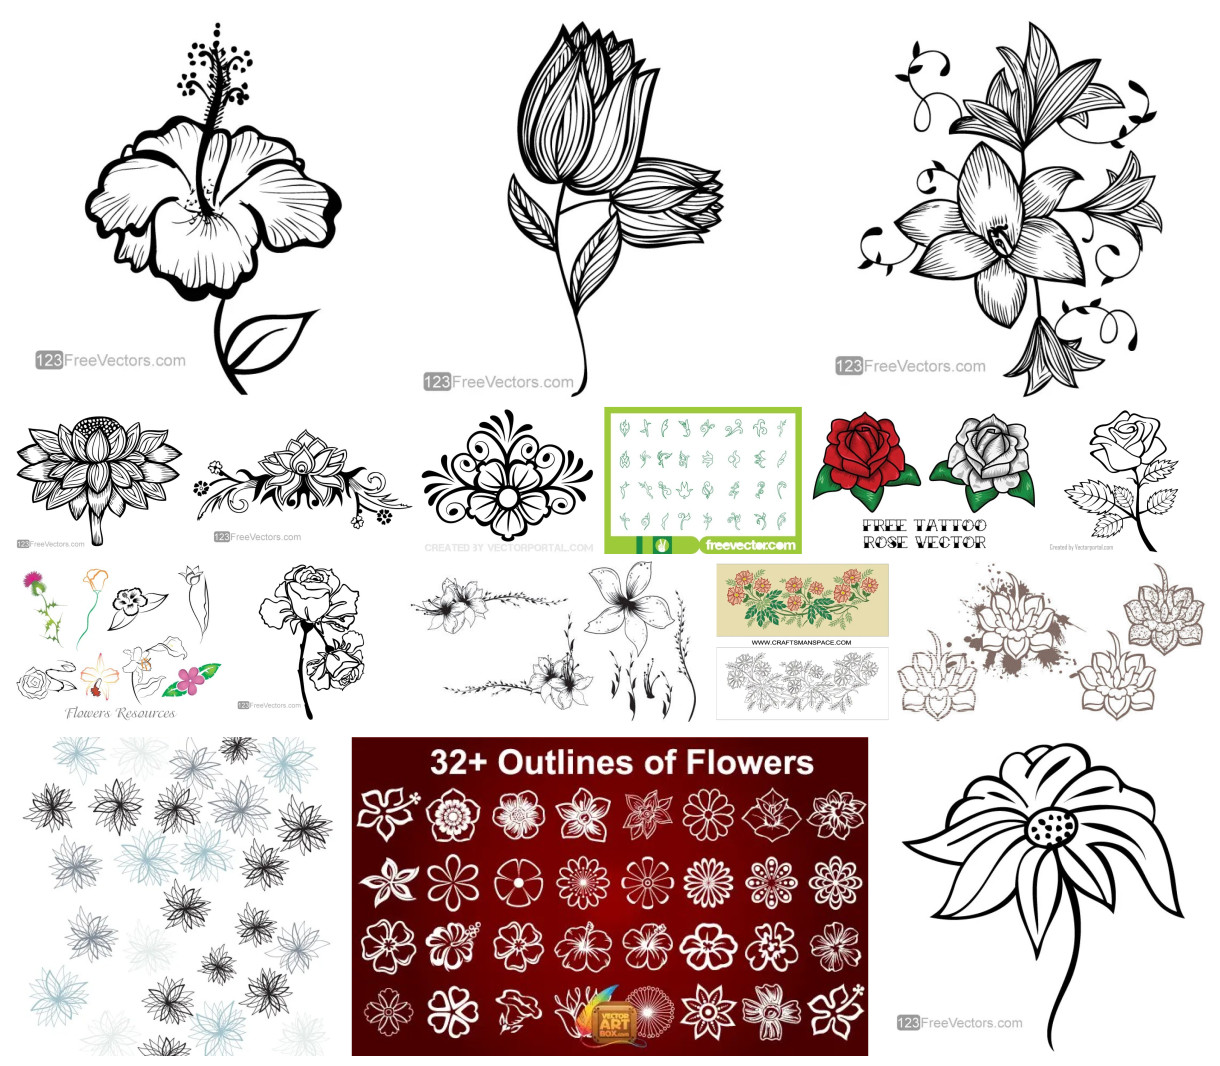 17 Free Flower Outline Vector Designs: Crafting Beauty in Every Line